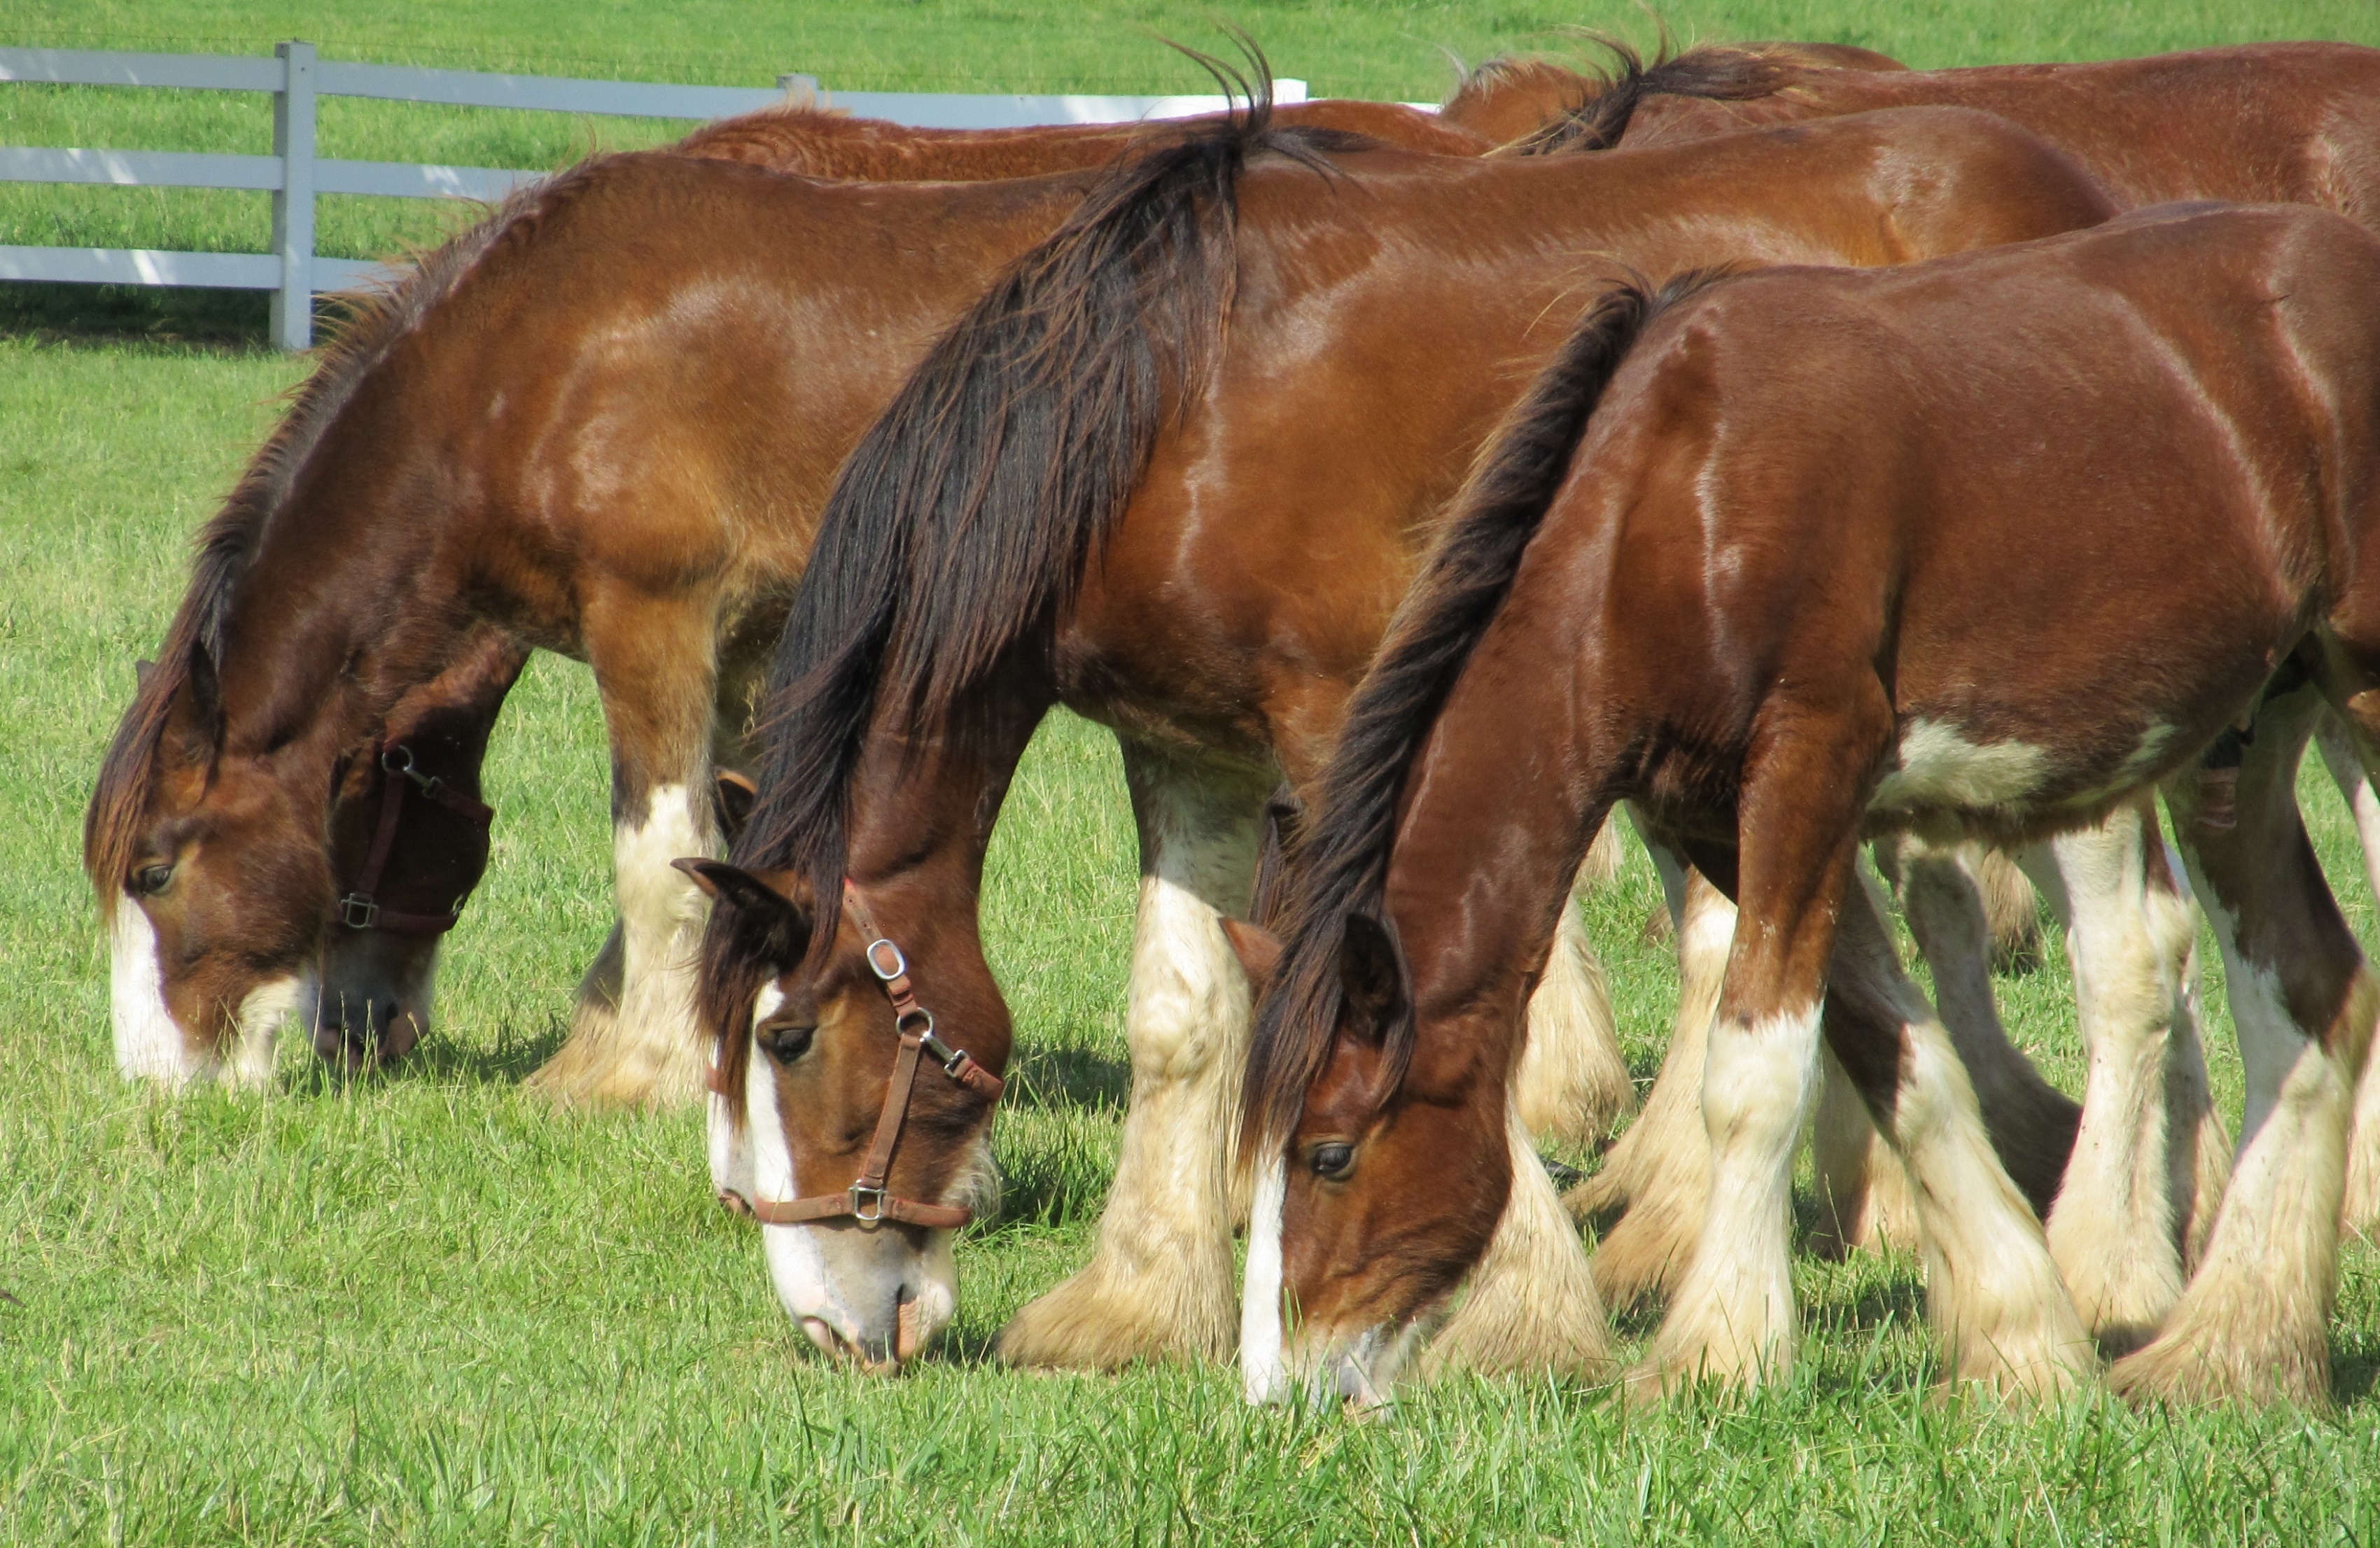 Clydesdales, Horses, Yearlings, Young, horse, grass